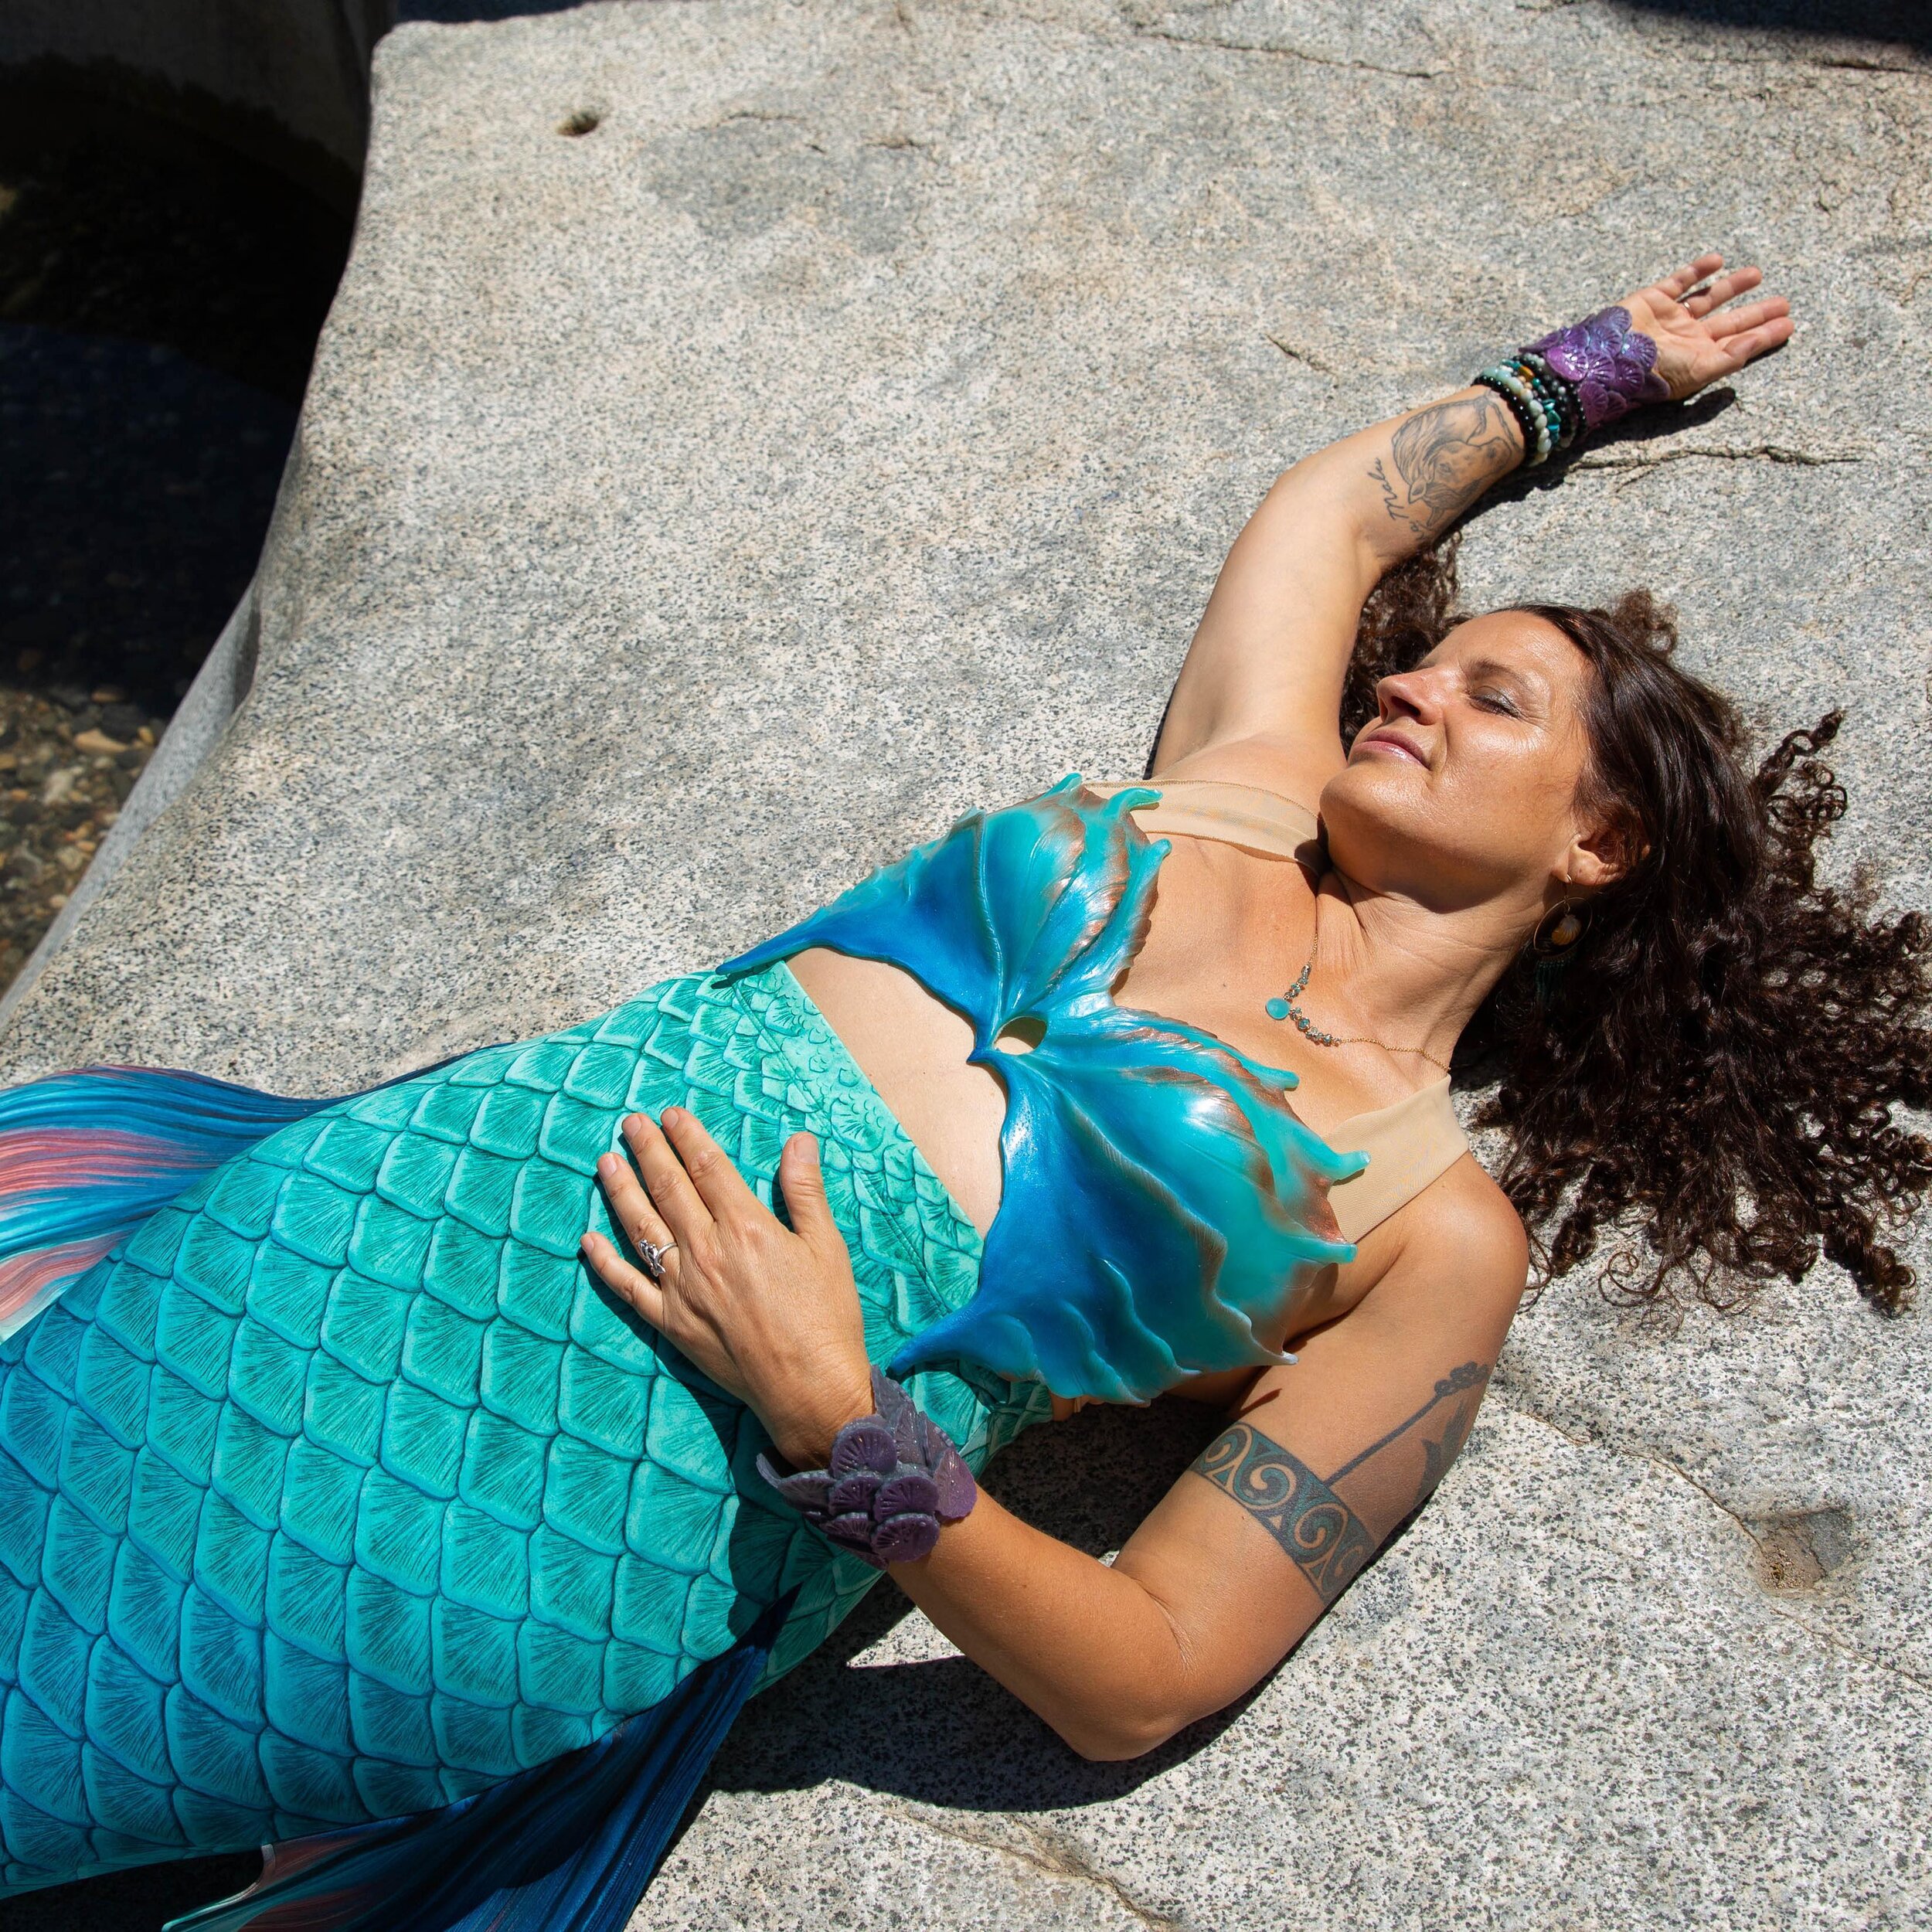 Today is a lovely day to take a little mermaid break &amp; lounge in the sun, don&rsquo;t you think? 

Wishing you all a lovely day of REBIRTH! Even though I don&rsquo;t celebrate Easter, I do see a a lot of beauty in the metaphorical image of transf